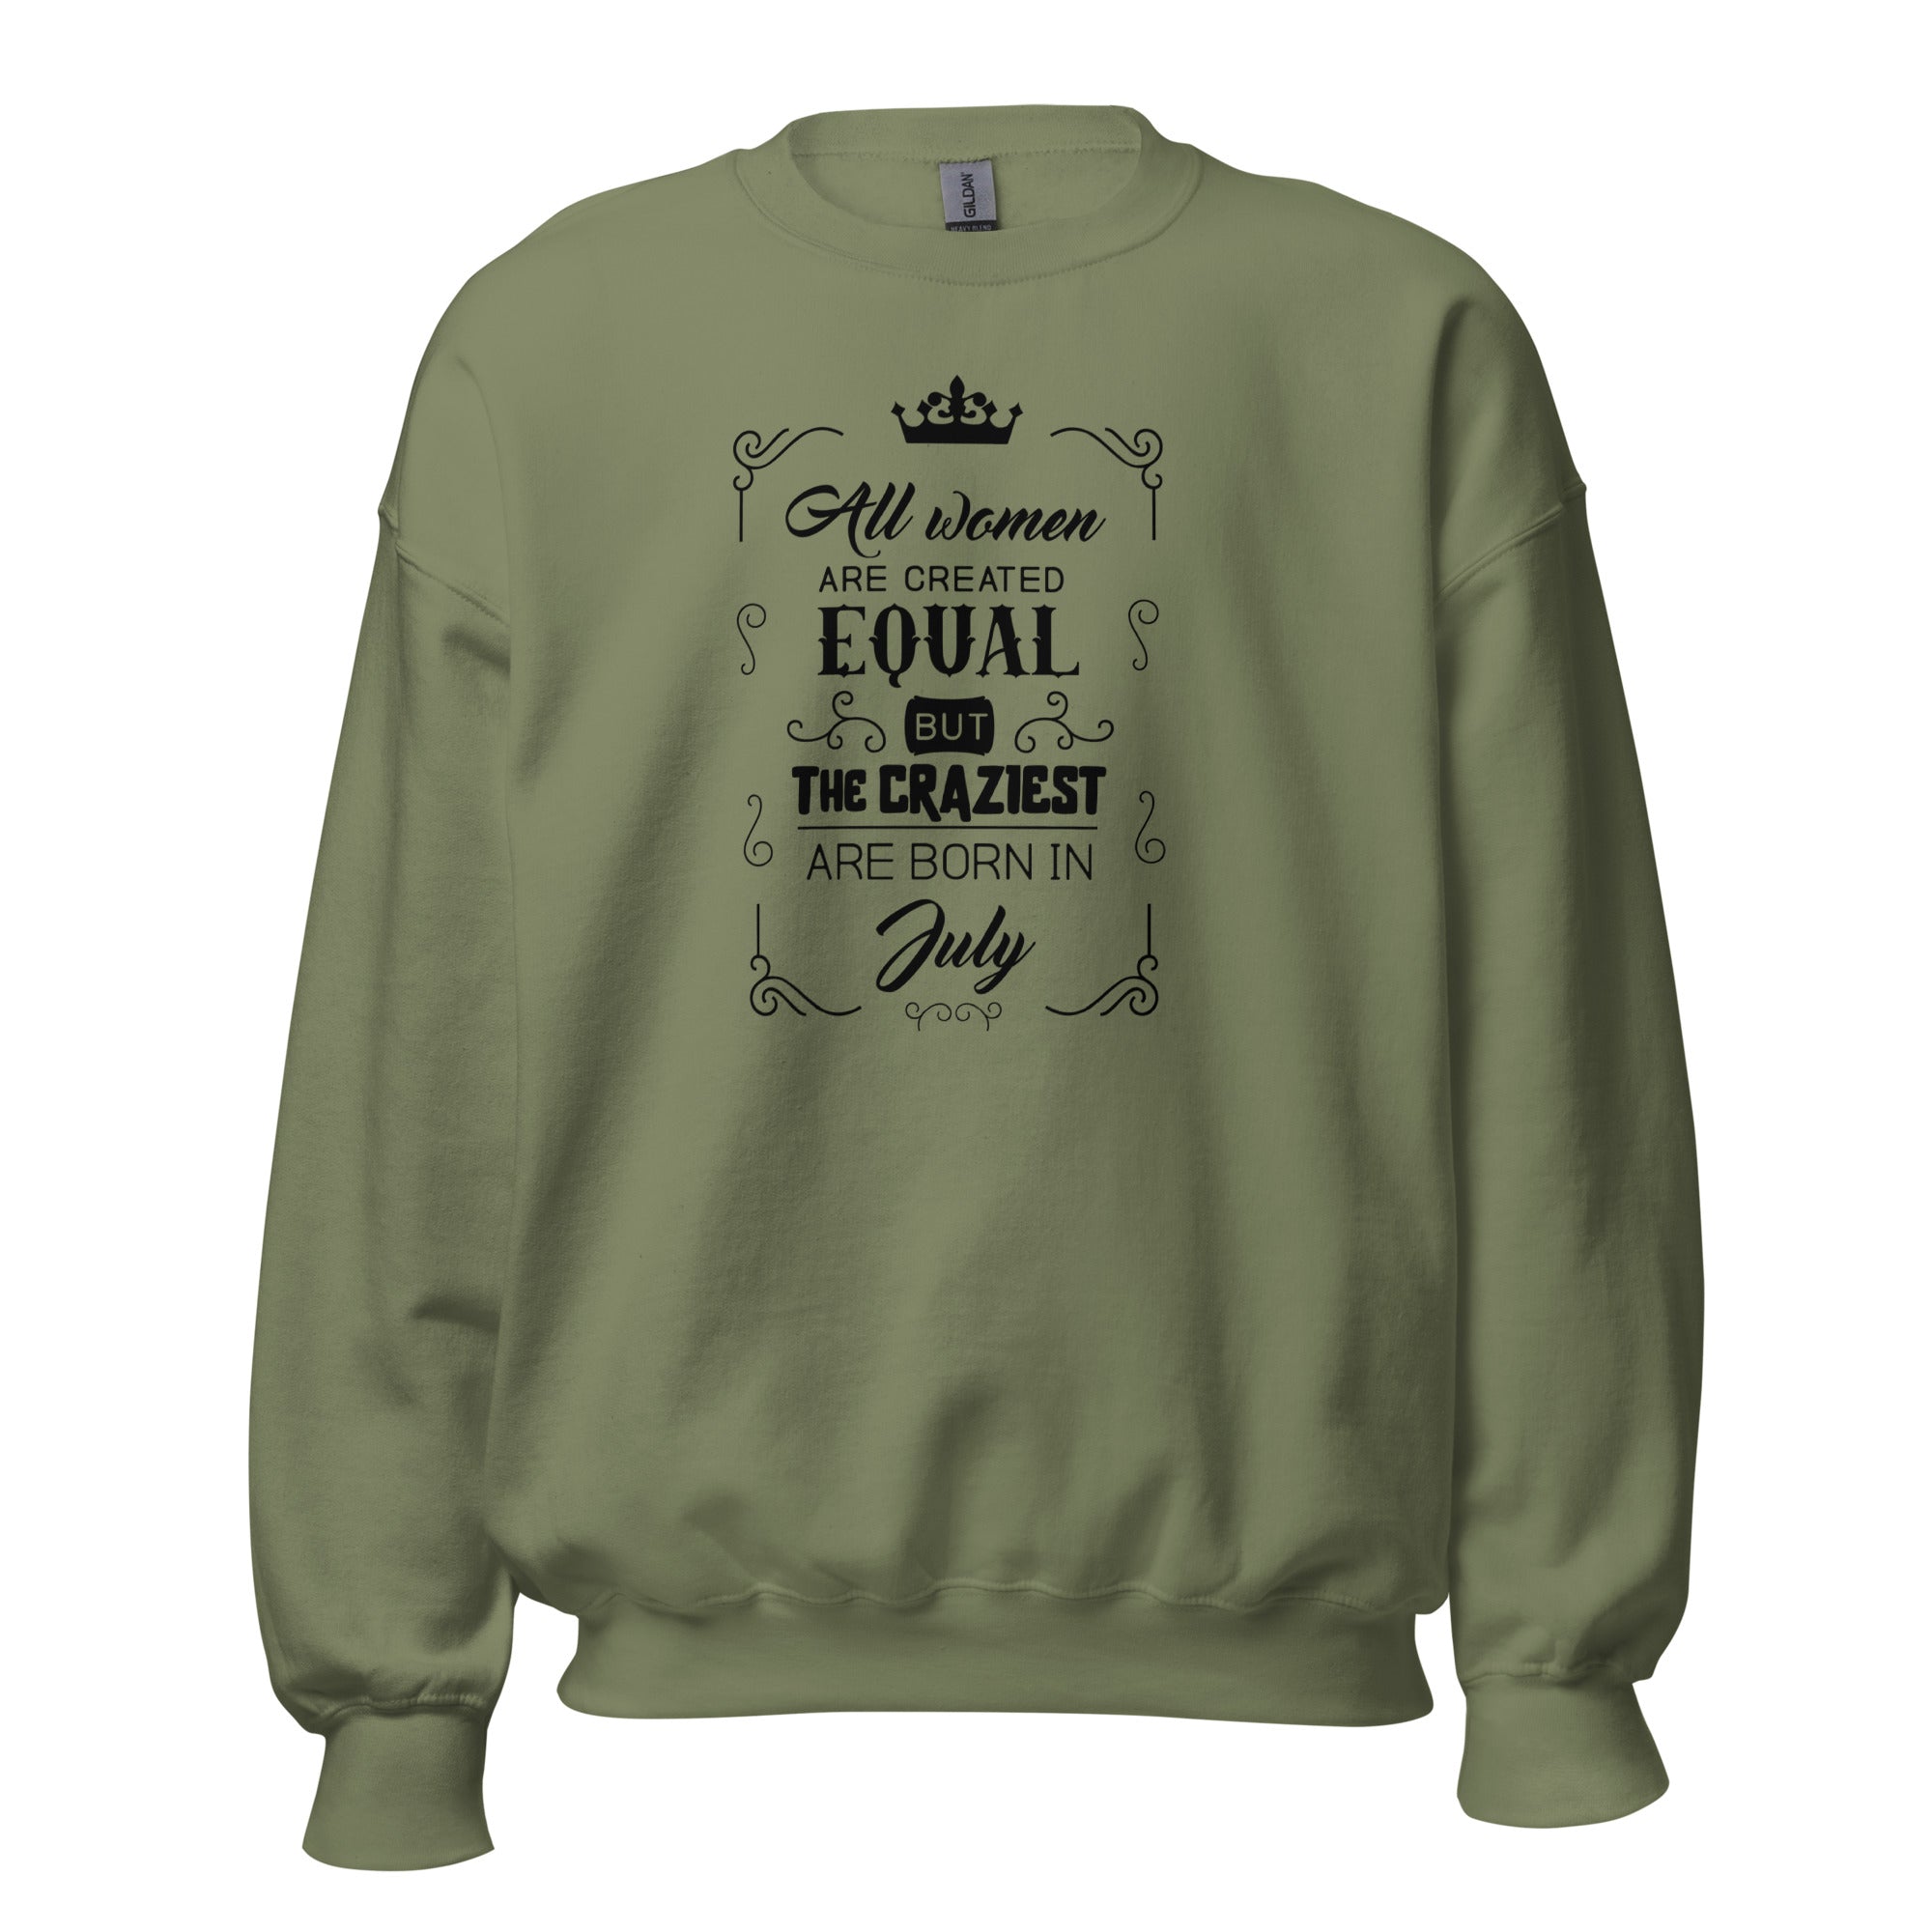 Women's Crew Neck Sweatshirt - All Women Are Created Equal But The Craziest Are Born In July - GRAPHIC T-SHIRTS